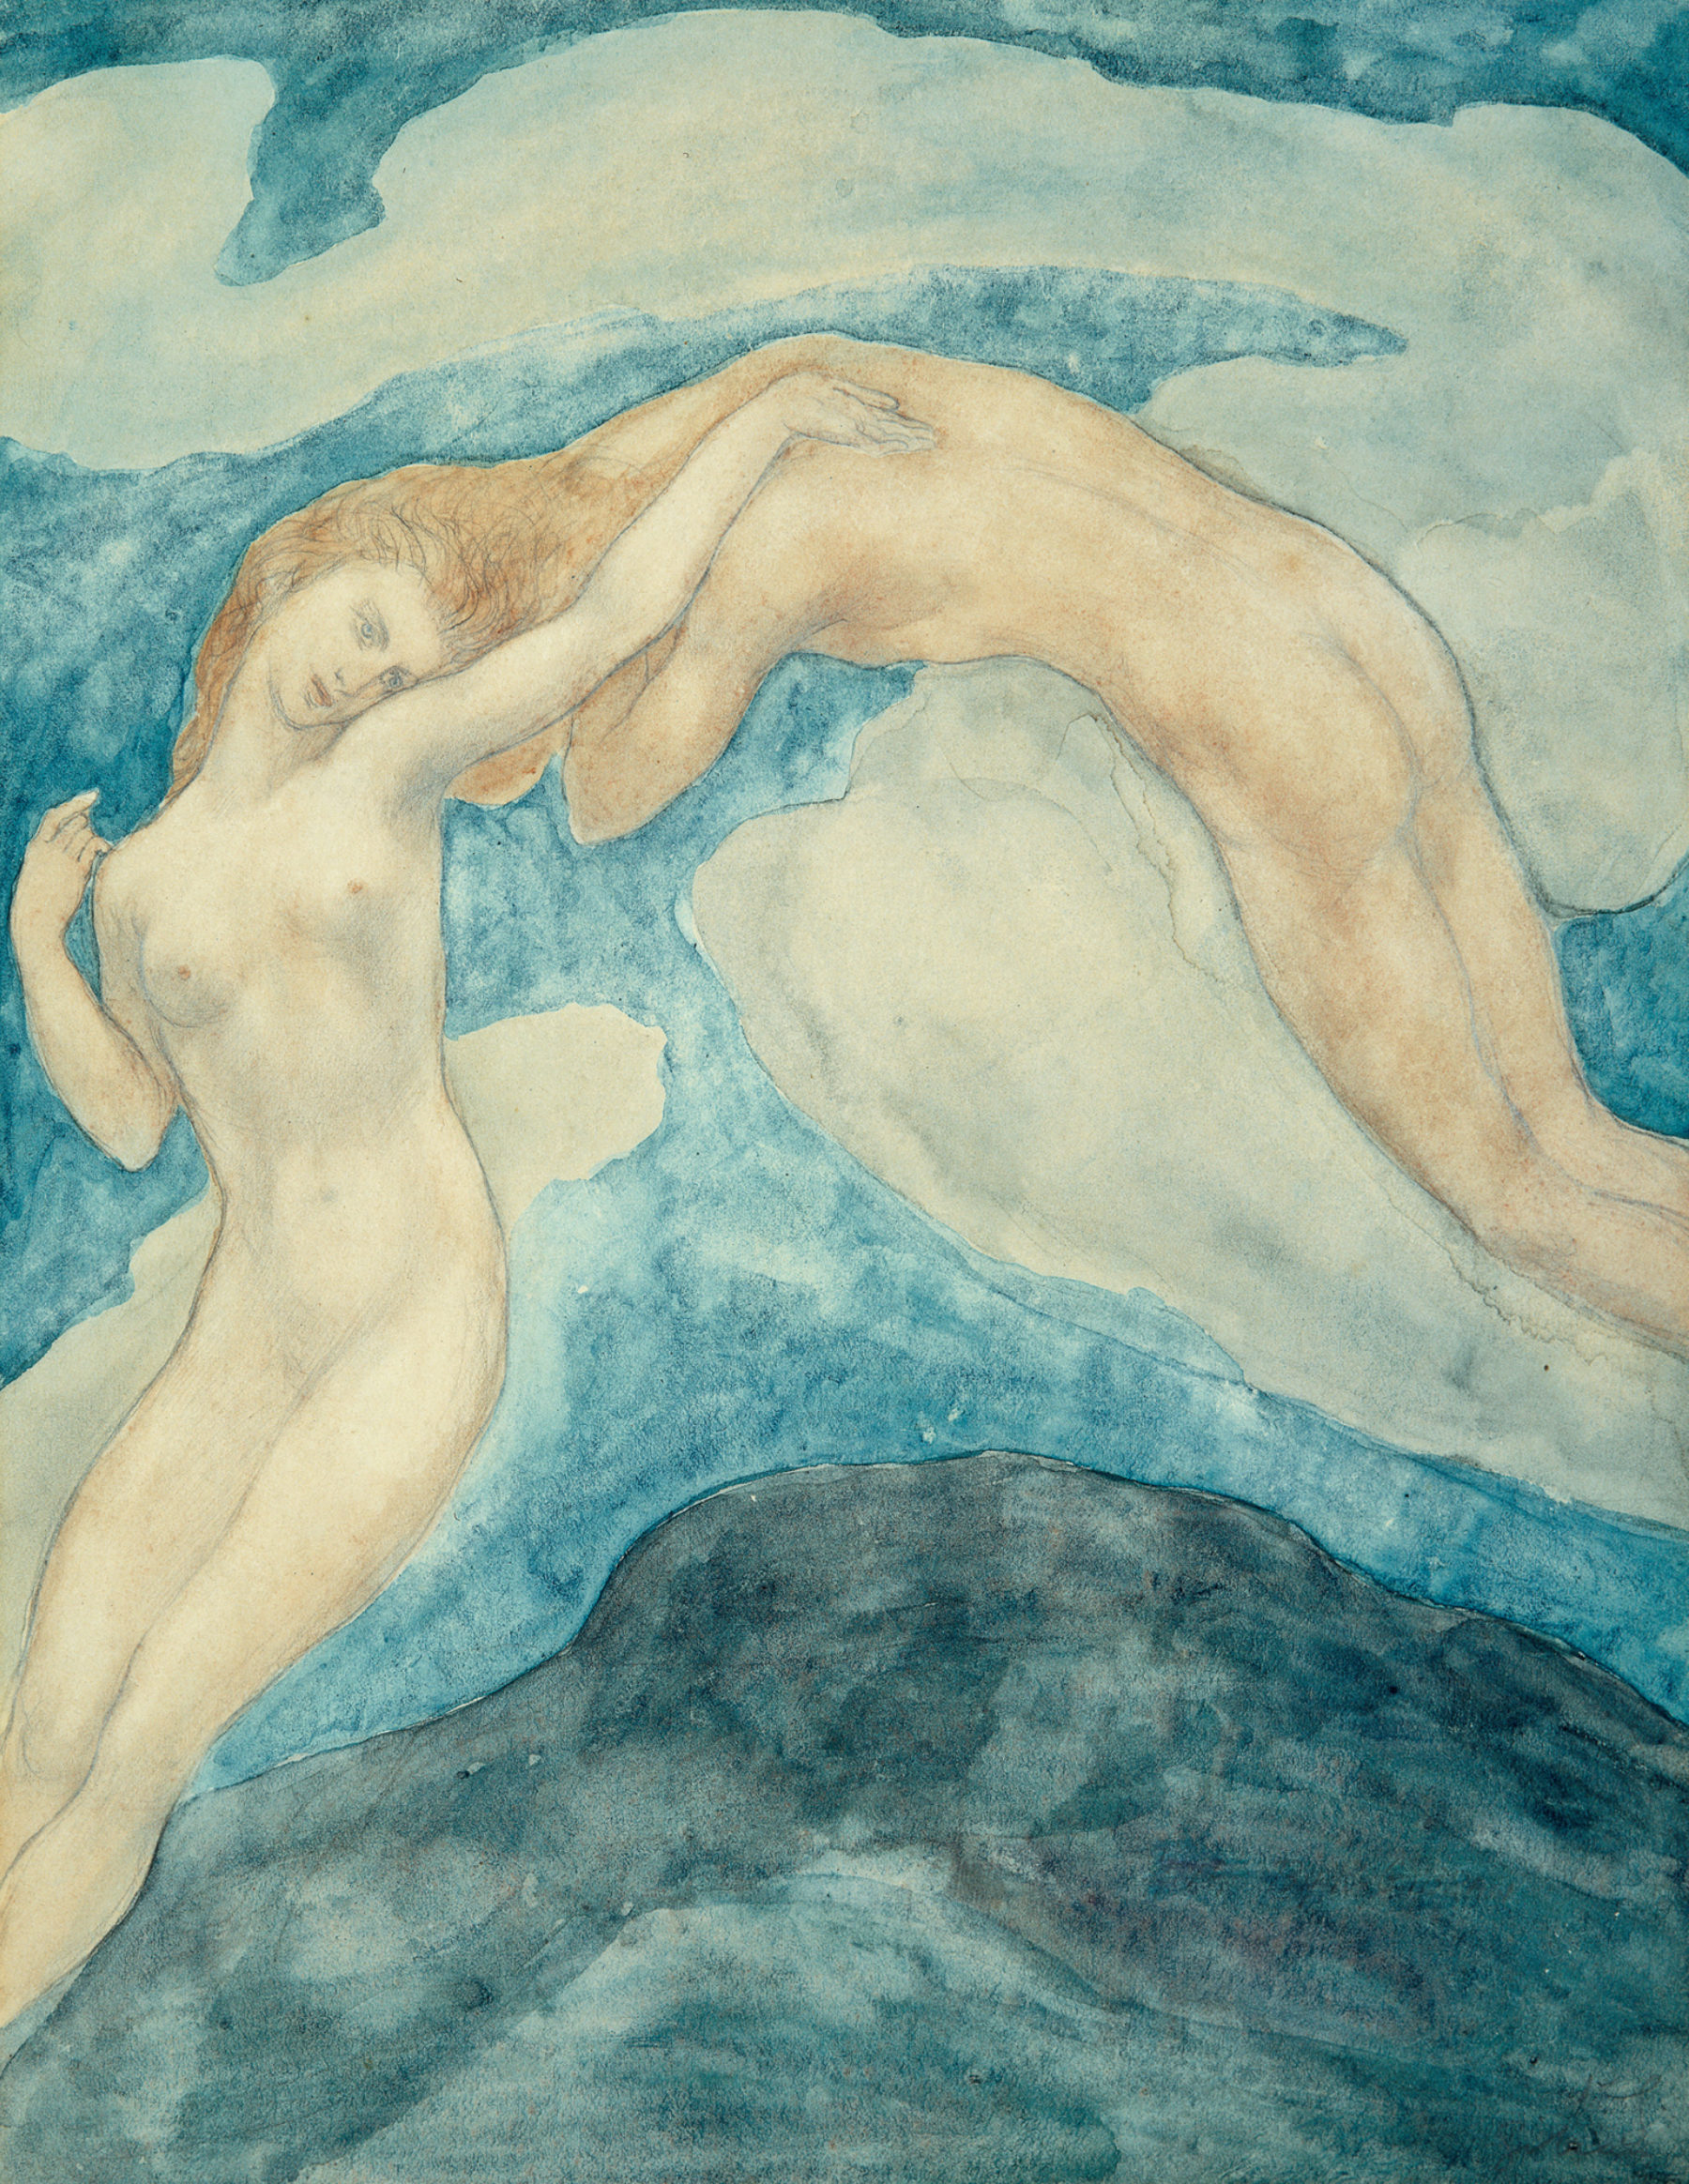 Kahlil Gibran, "The Summit," c. 1925. Watercolor and pencil on paper, 11 x 8 1/2 inches (27.9 x 21.6 cm). Telfair Museum of Art, Savannah, Georgia, Gift of Mary Haskell Minis. Photography by Erwin Gaspin